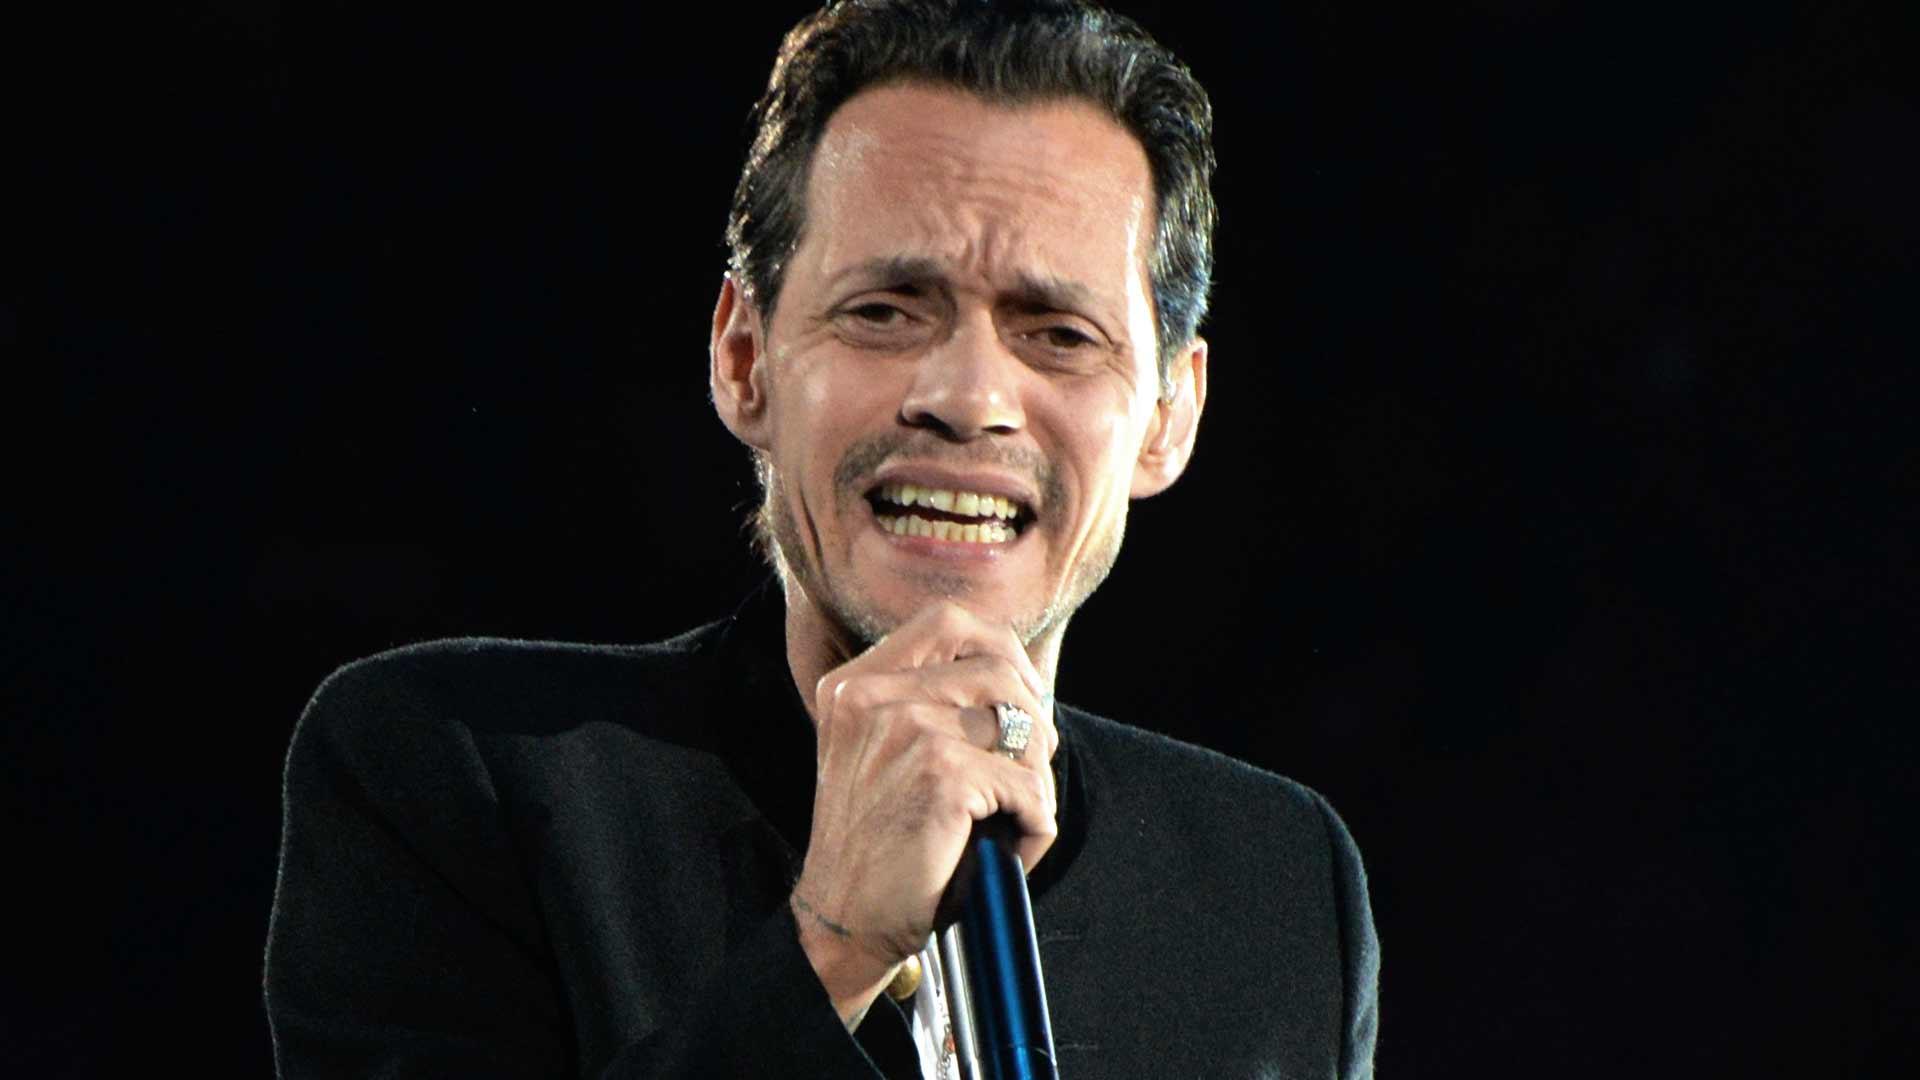 Marc Anthony Settles $500,000 Lawsuit with Housekeeper Over Unpaid Wages